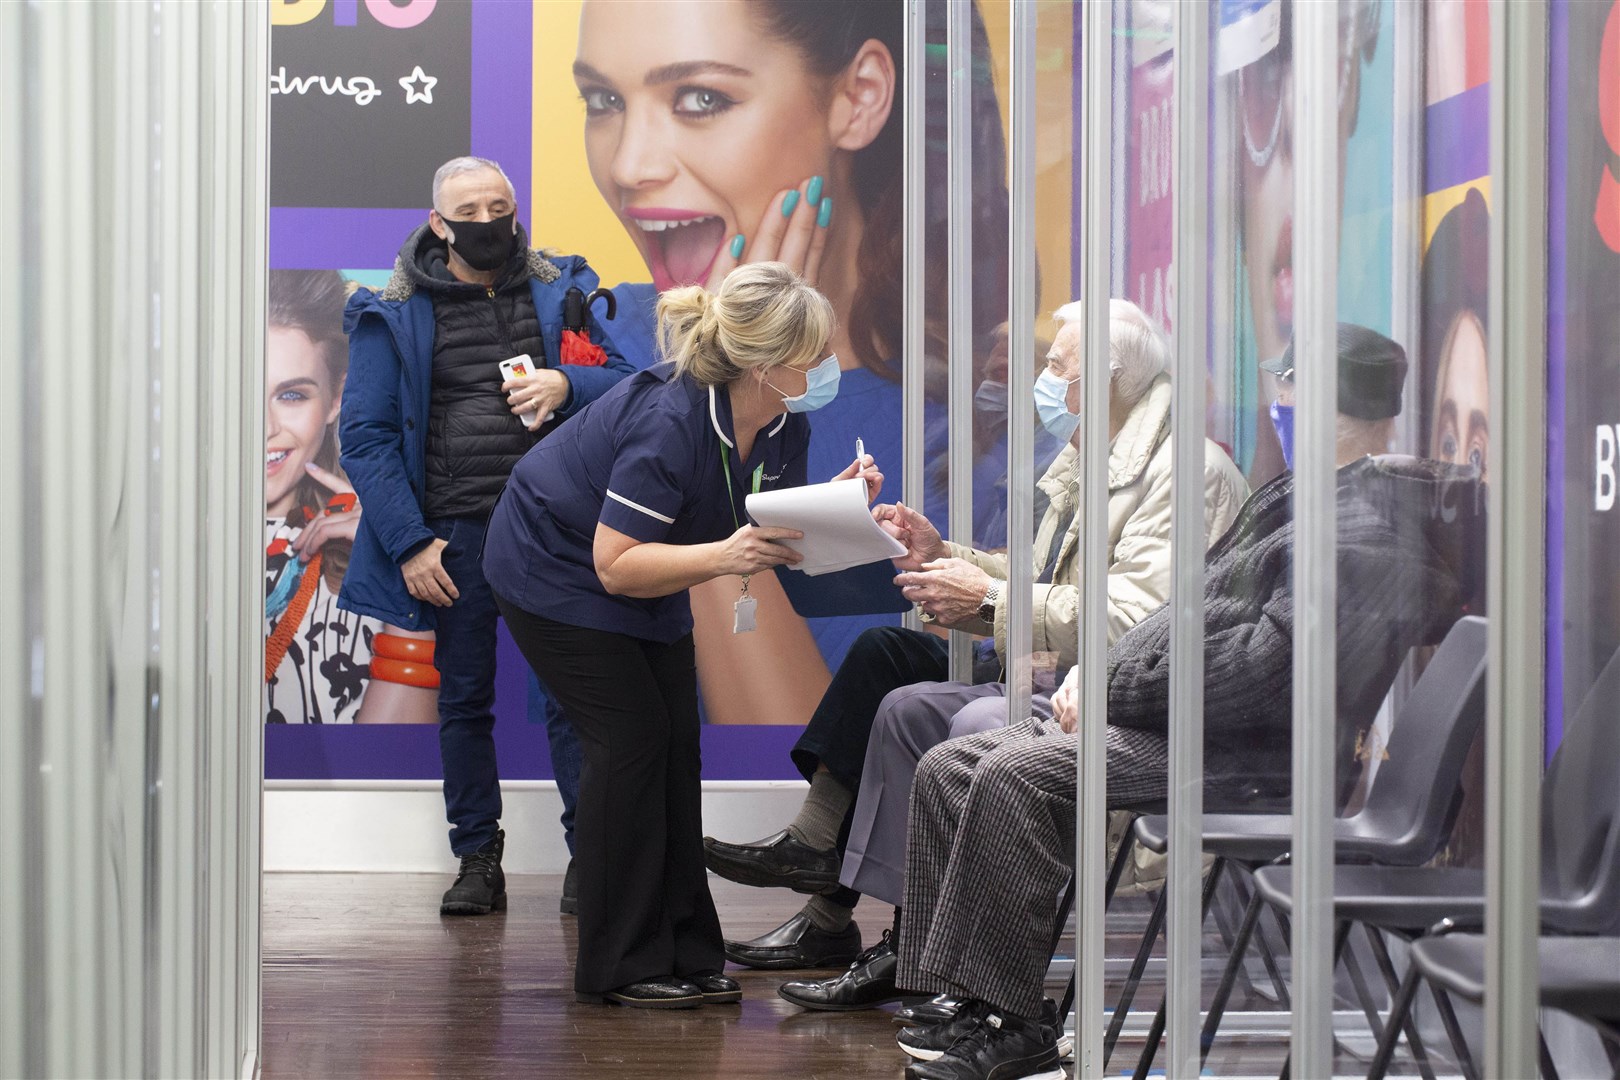 Social distancing measures put in place at Superdrug in Guildford as patients wait for the vaccine (Matt Alexander/PA)